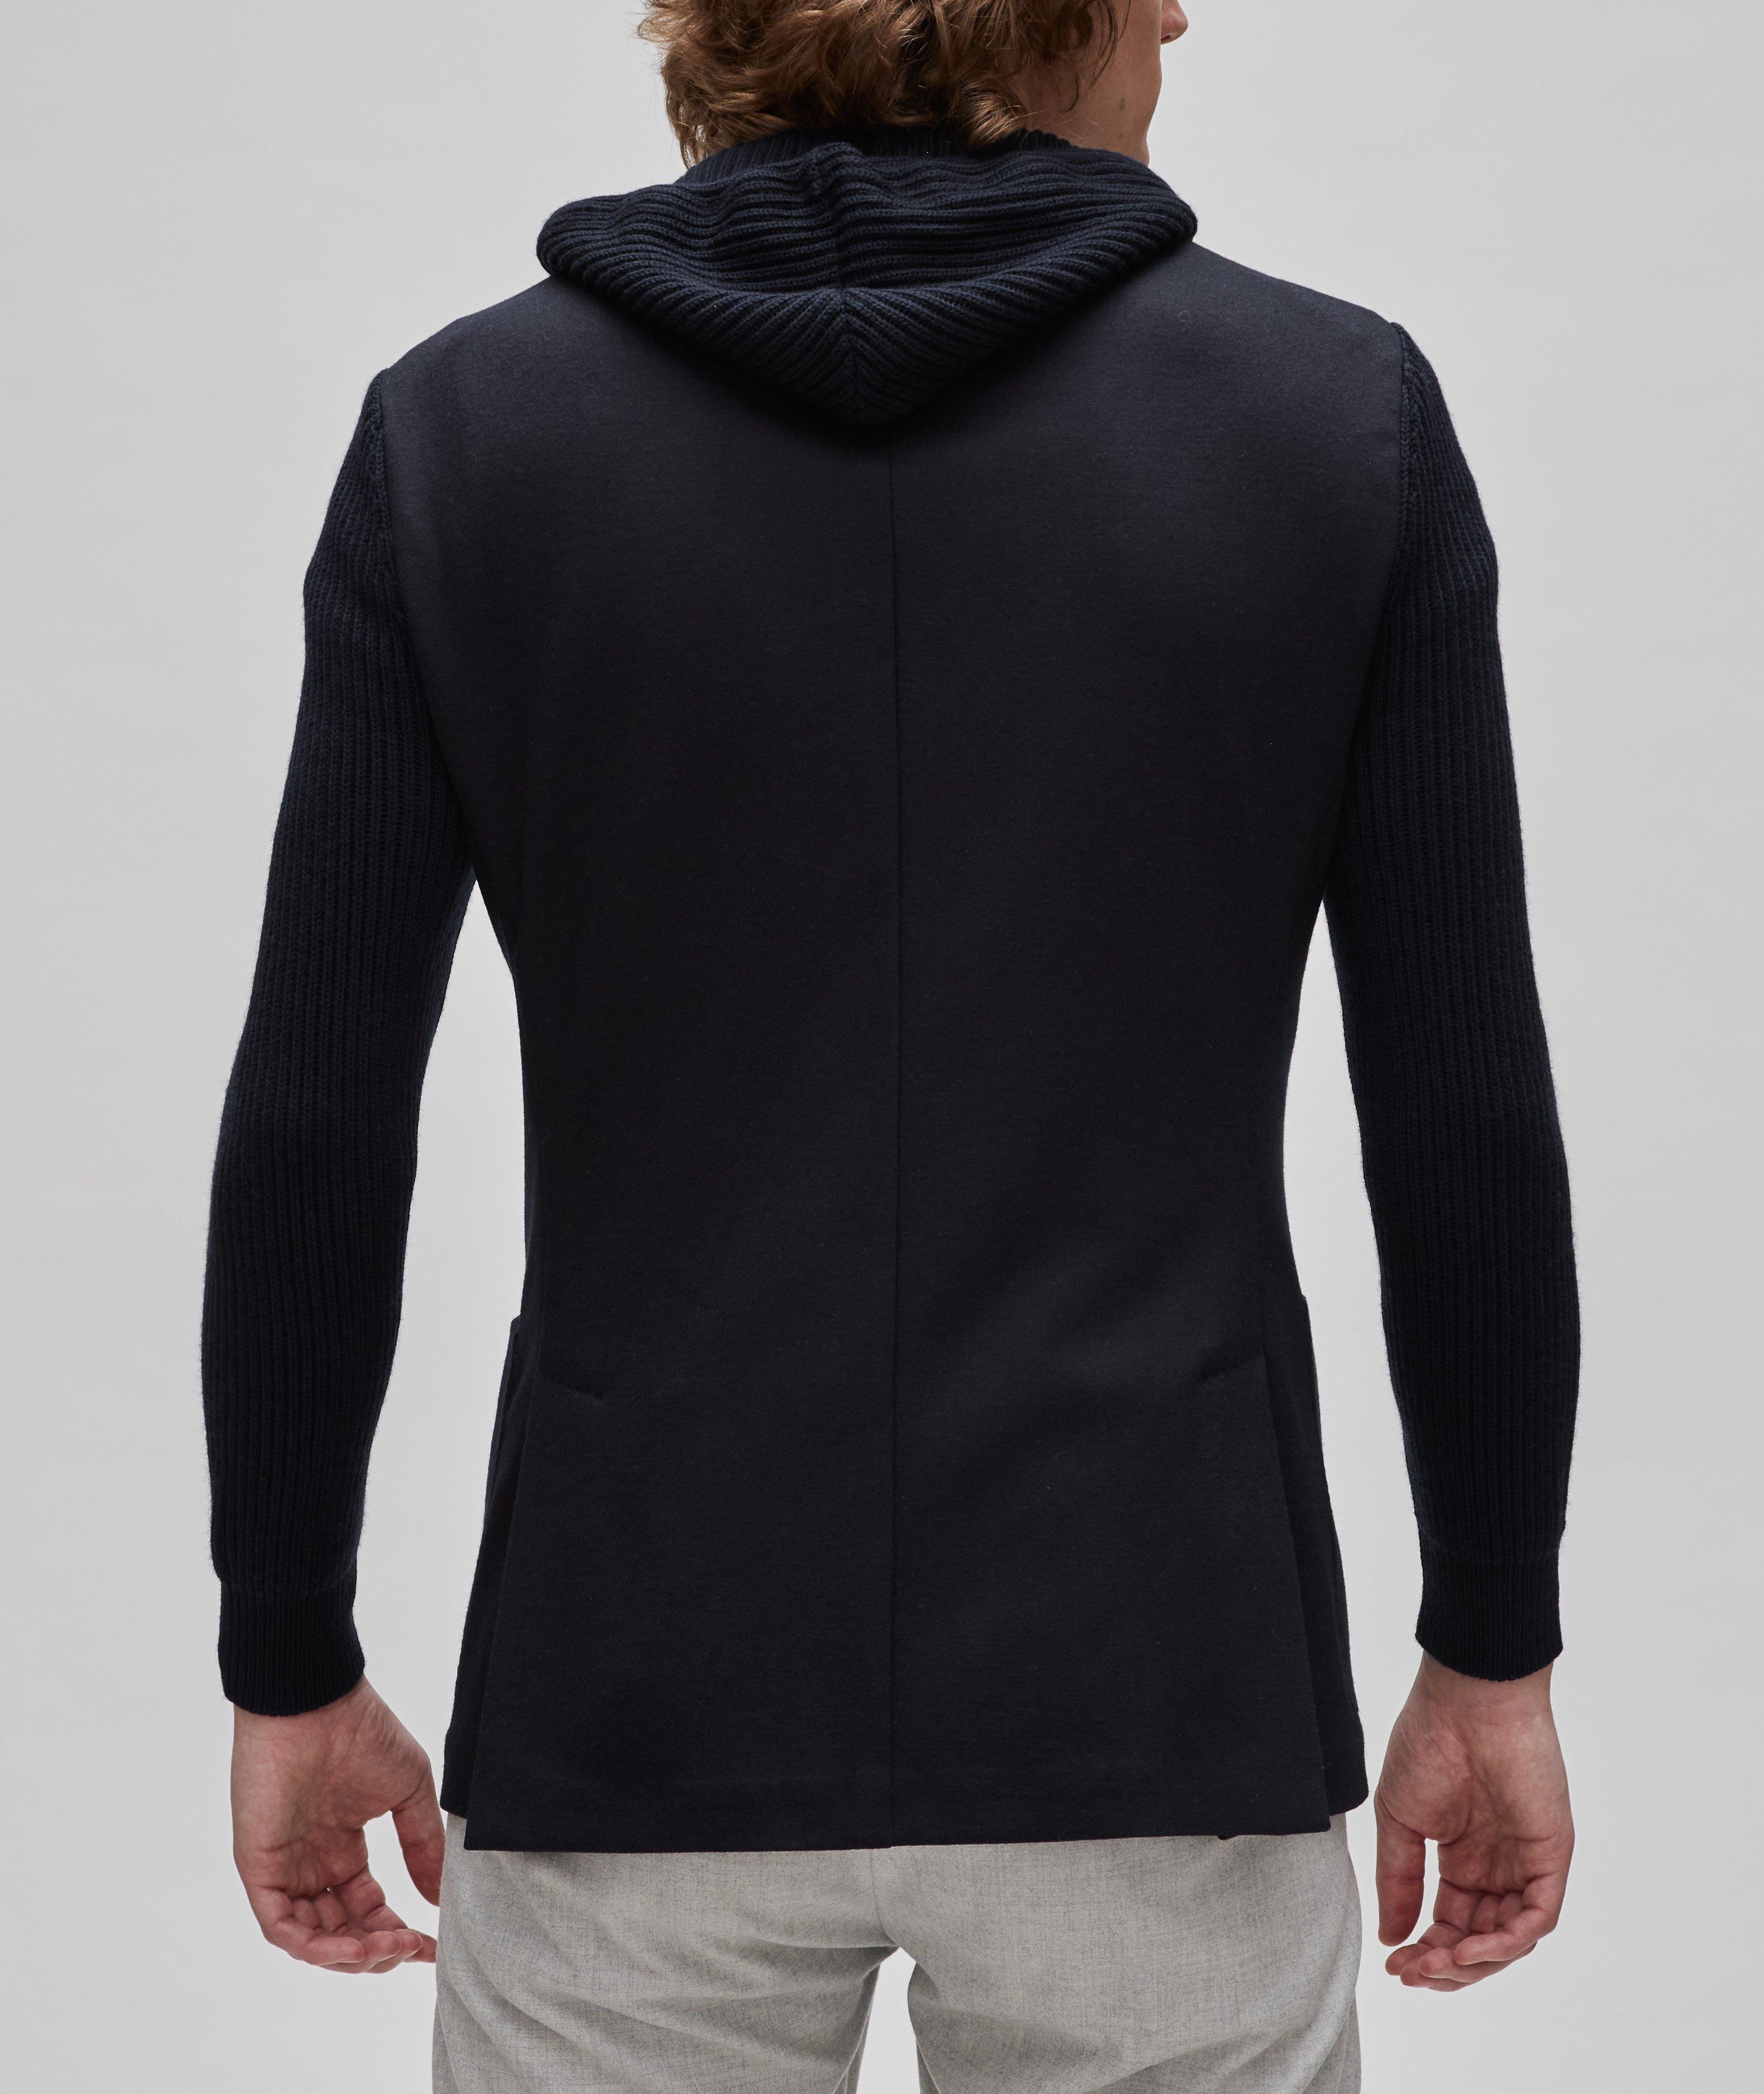 Knitted Wool-Cotton Blend Hooded Sport Jacket image 2